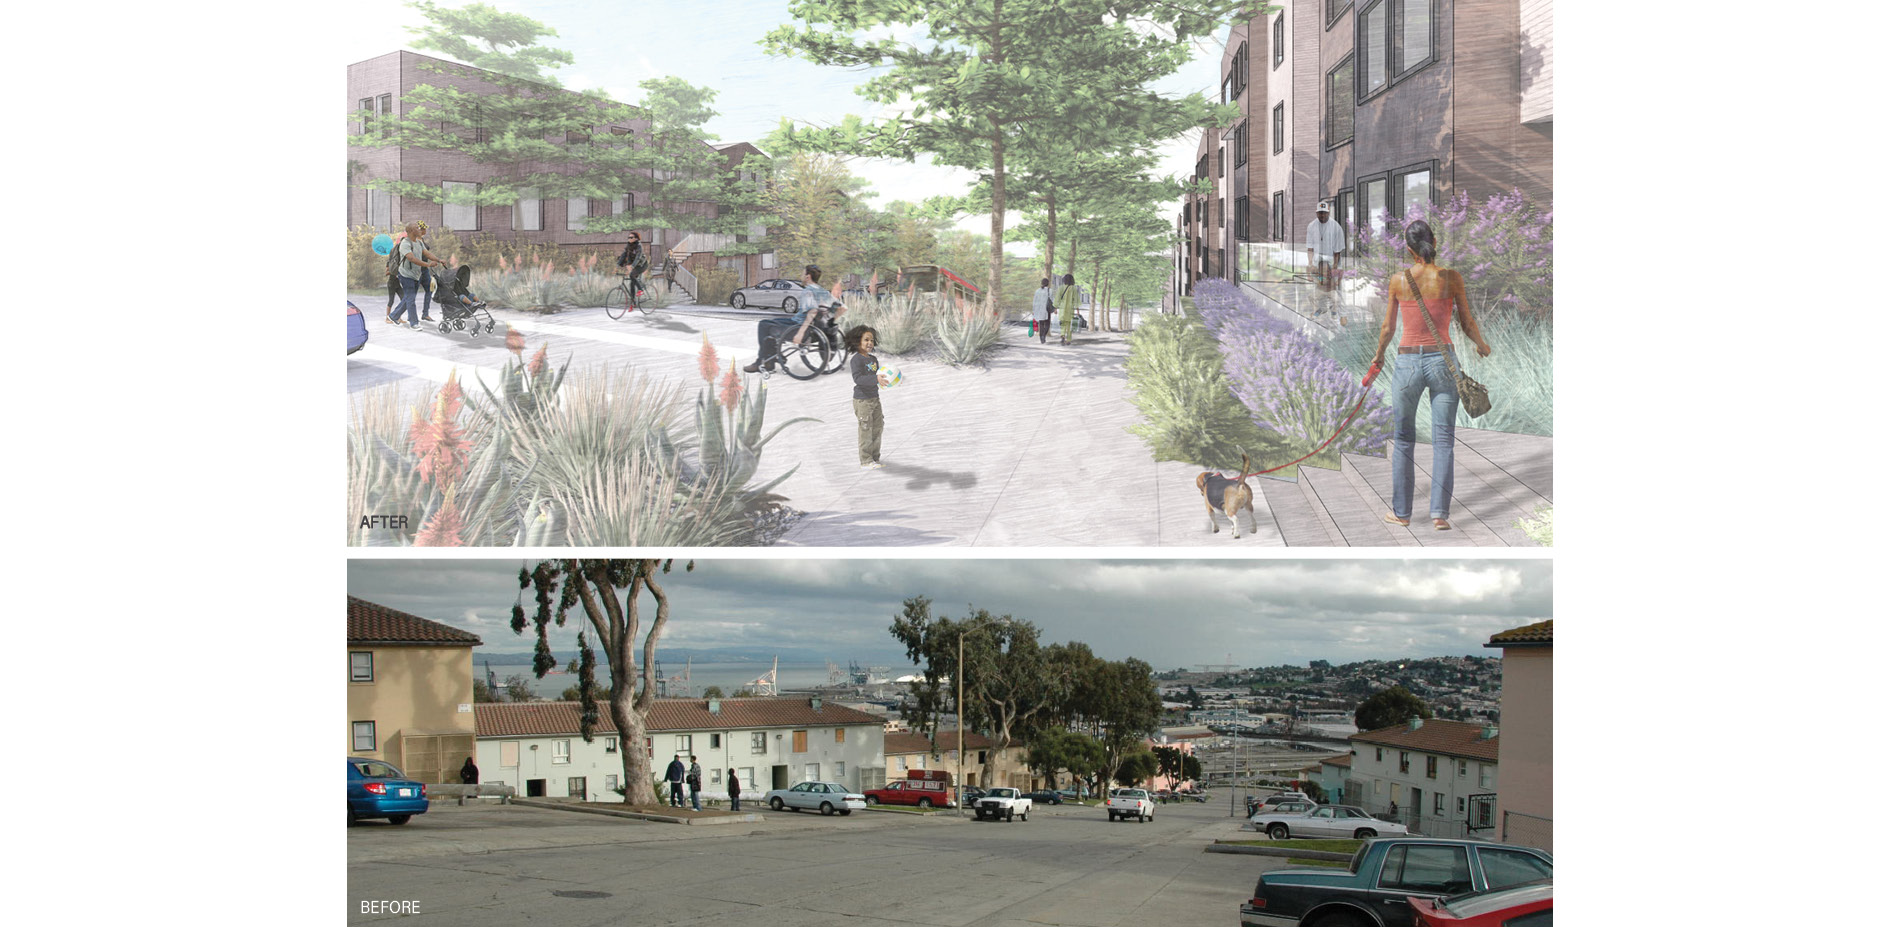 Walkable Streets Replace Auto-Dominated Landscape